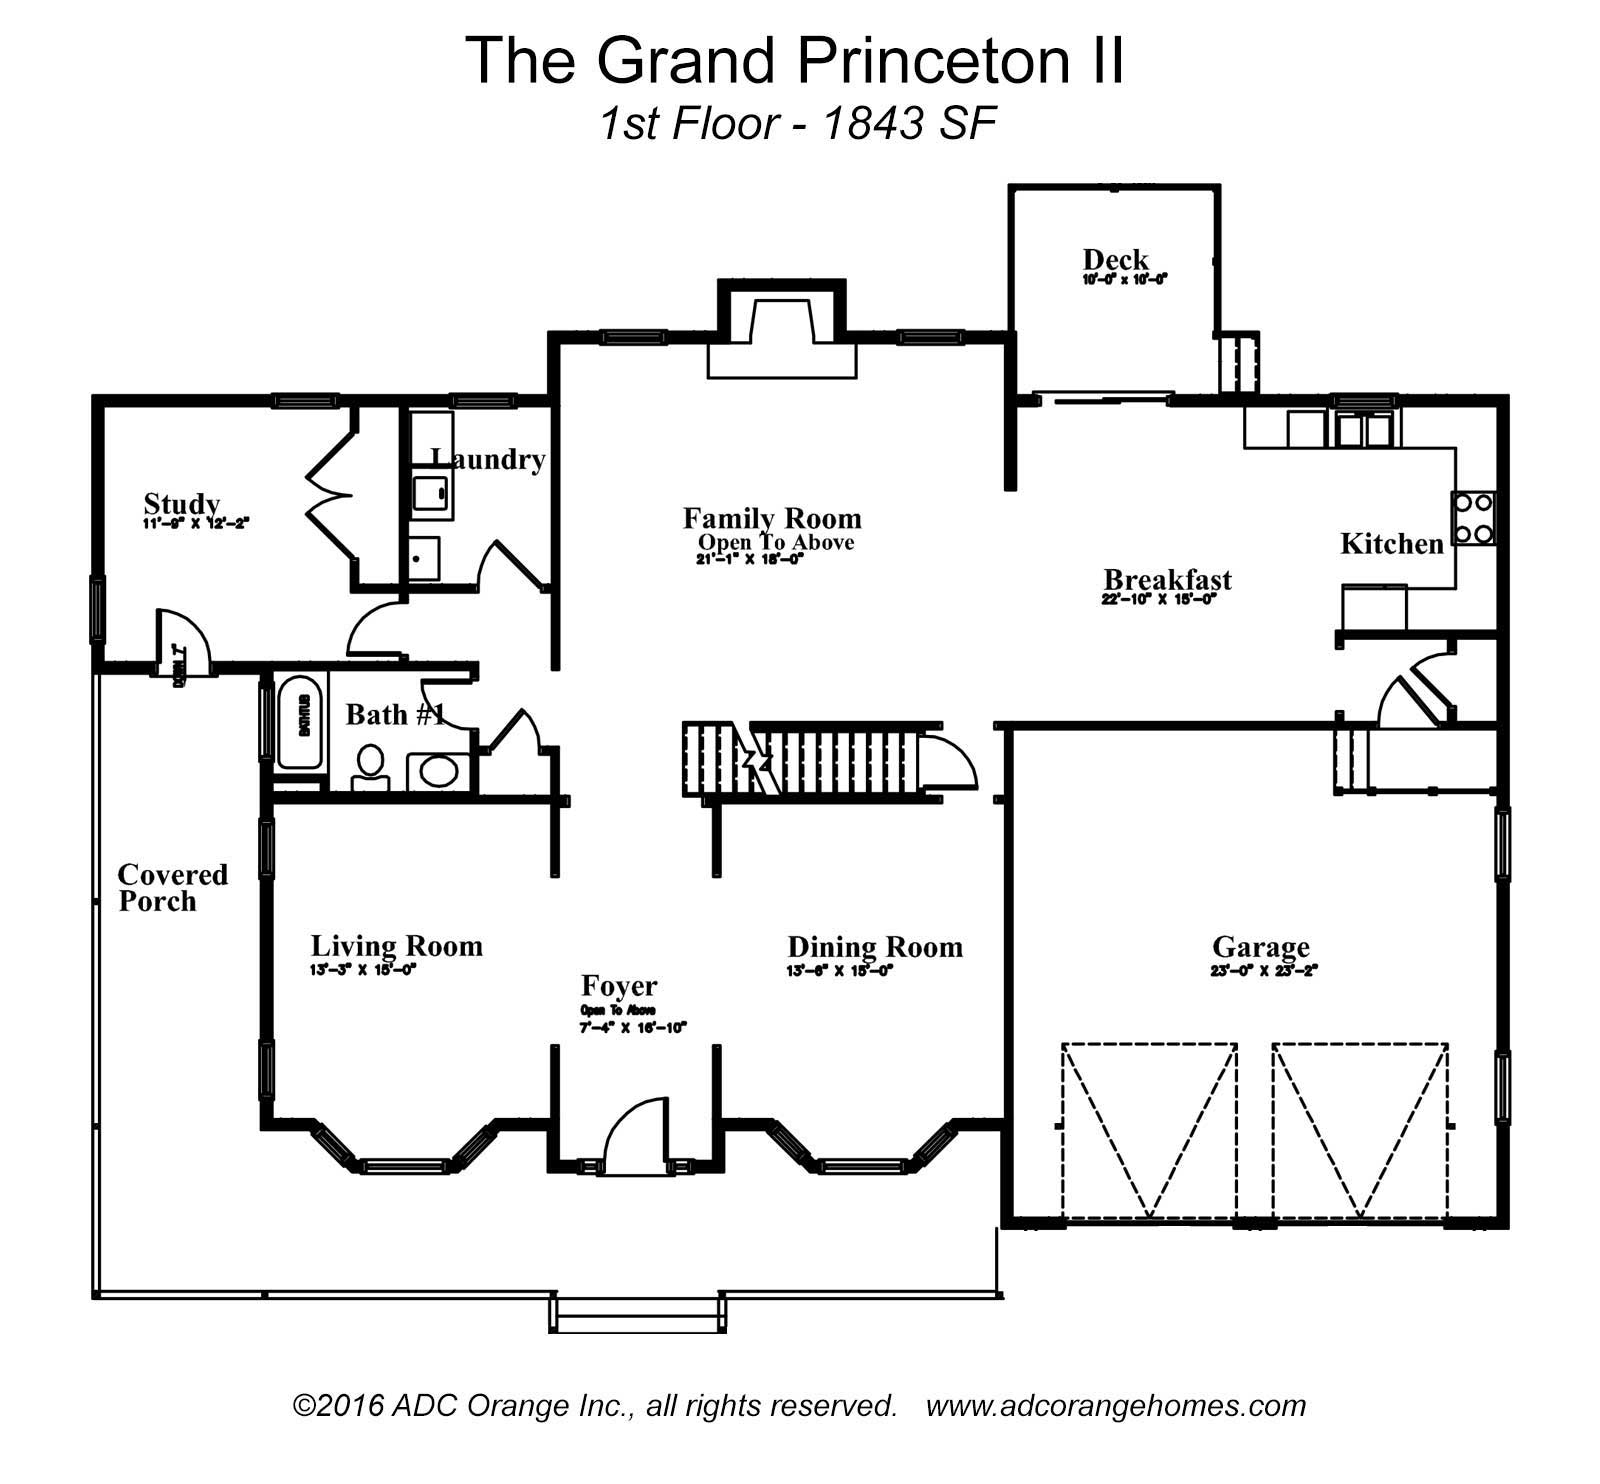 1st Floor Plan for Grand Princeton II - New Home in Orange County, New York